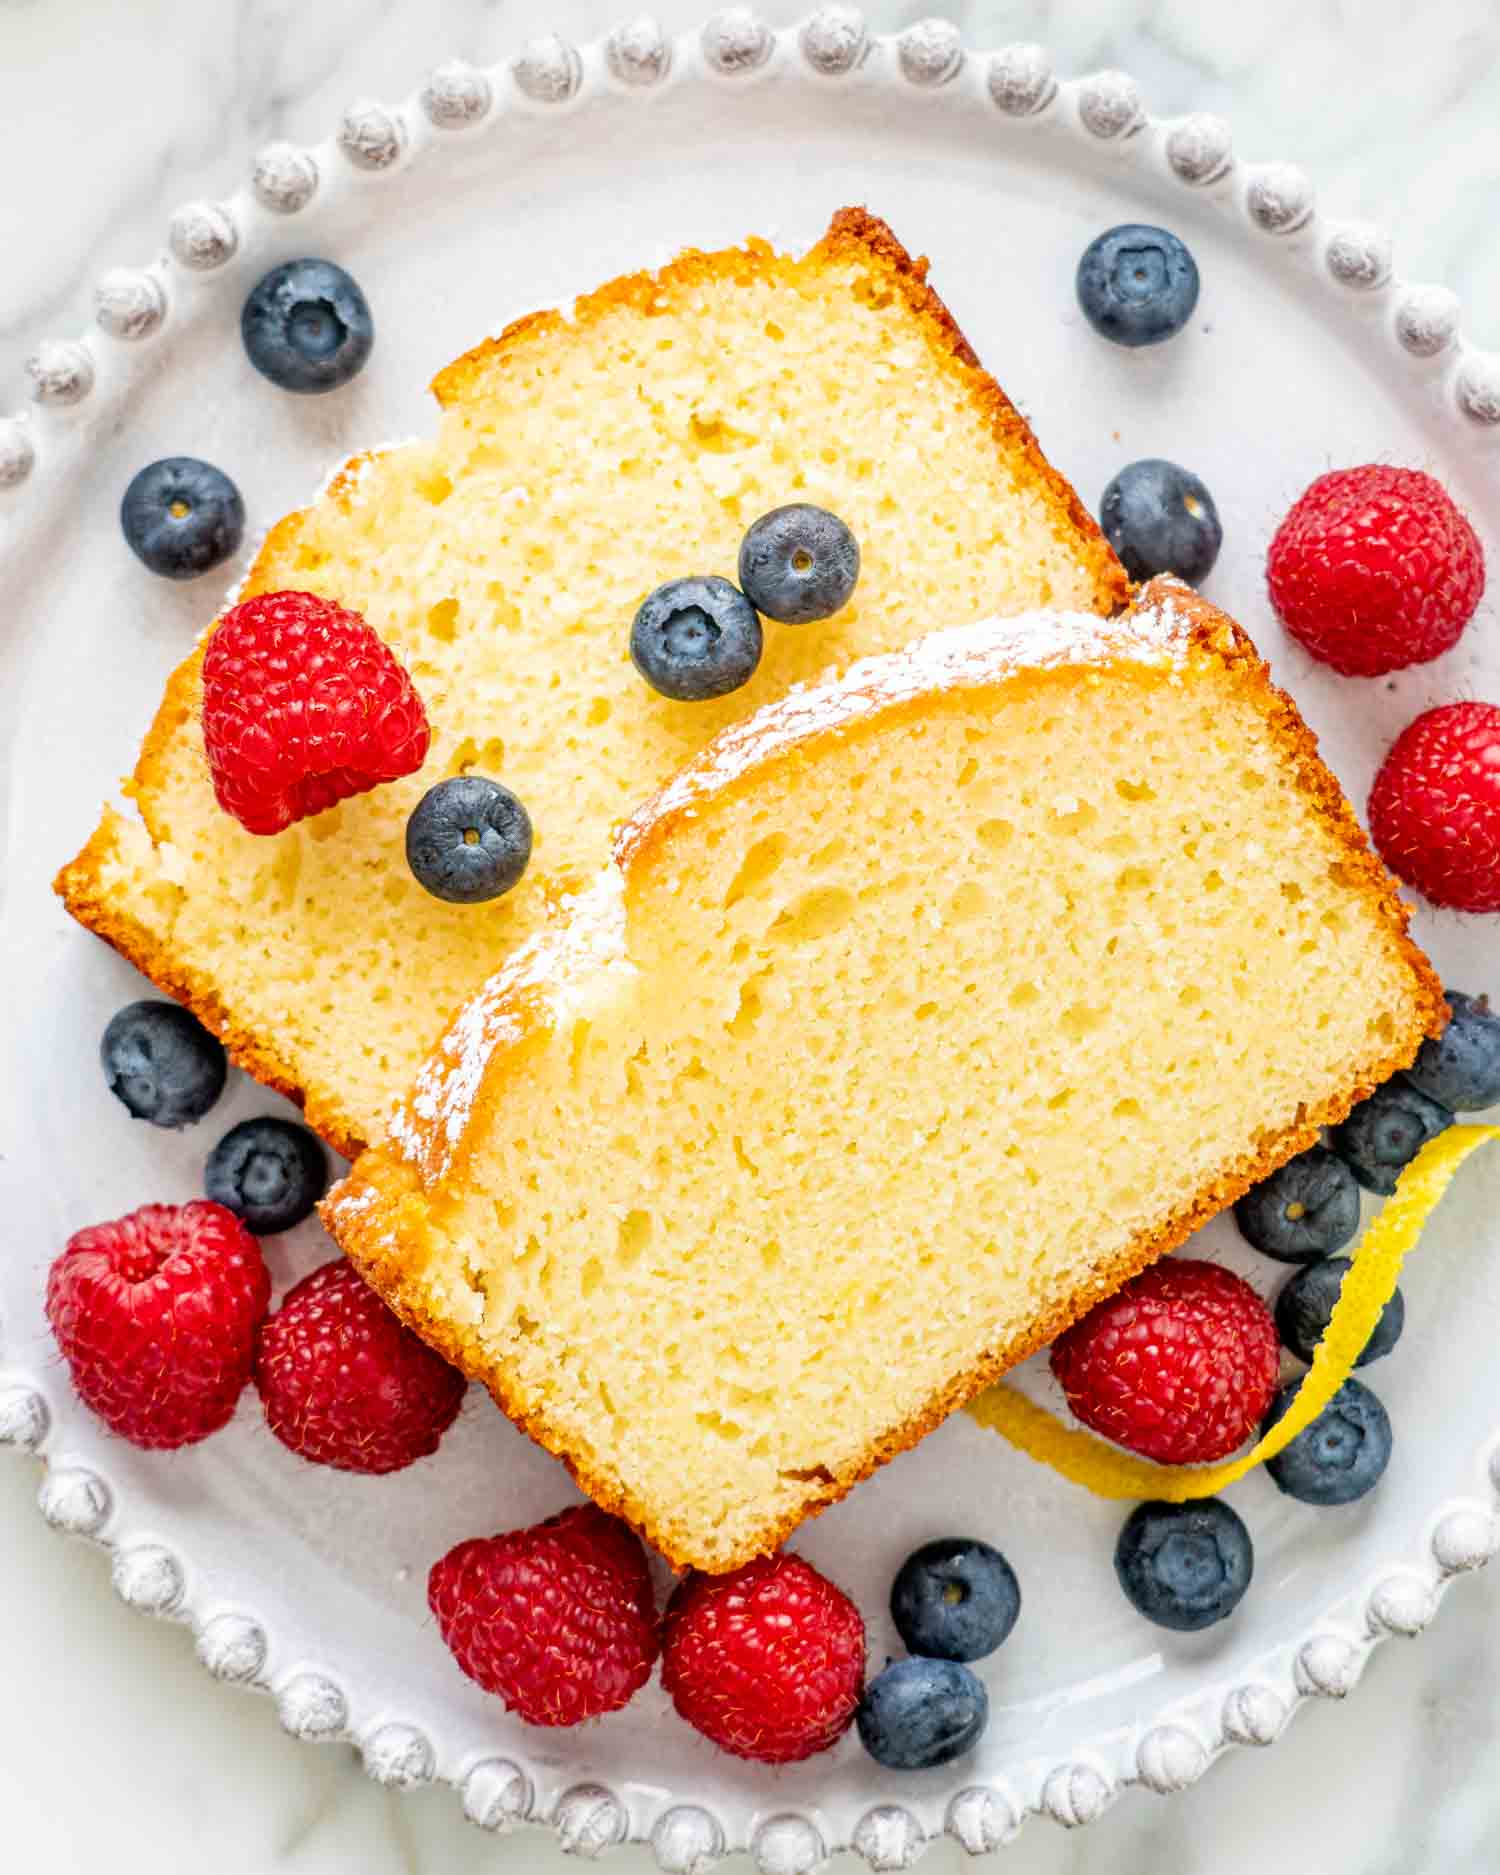 2 slices of lemon yogurt cake on a white plate with berries.